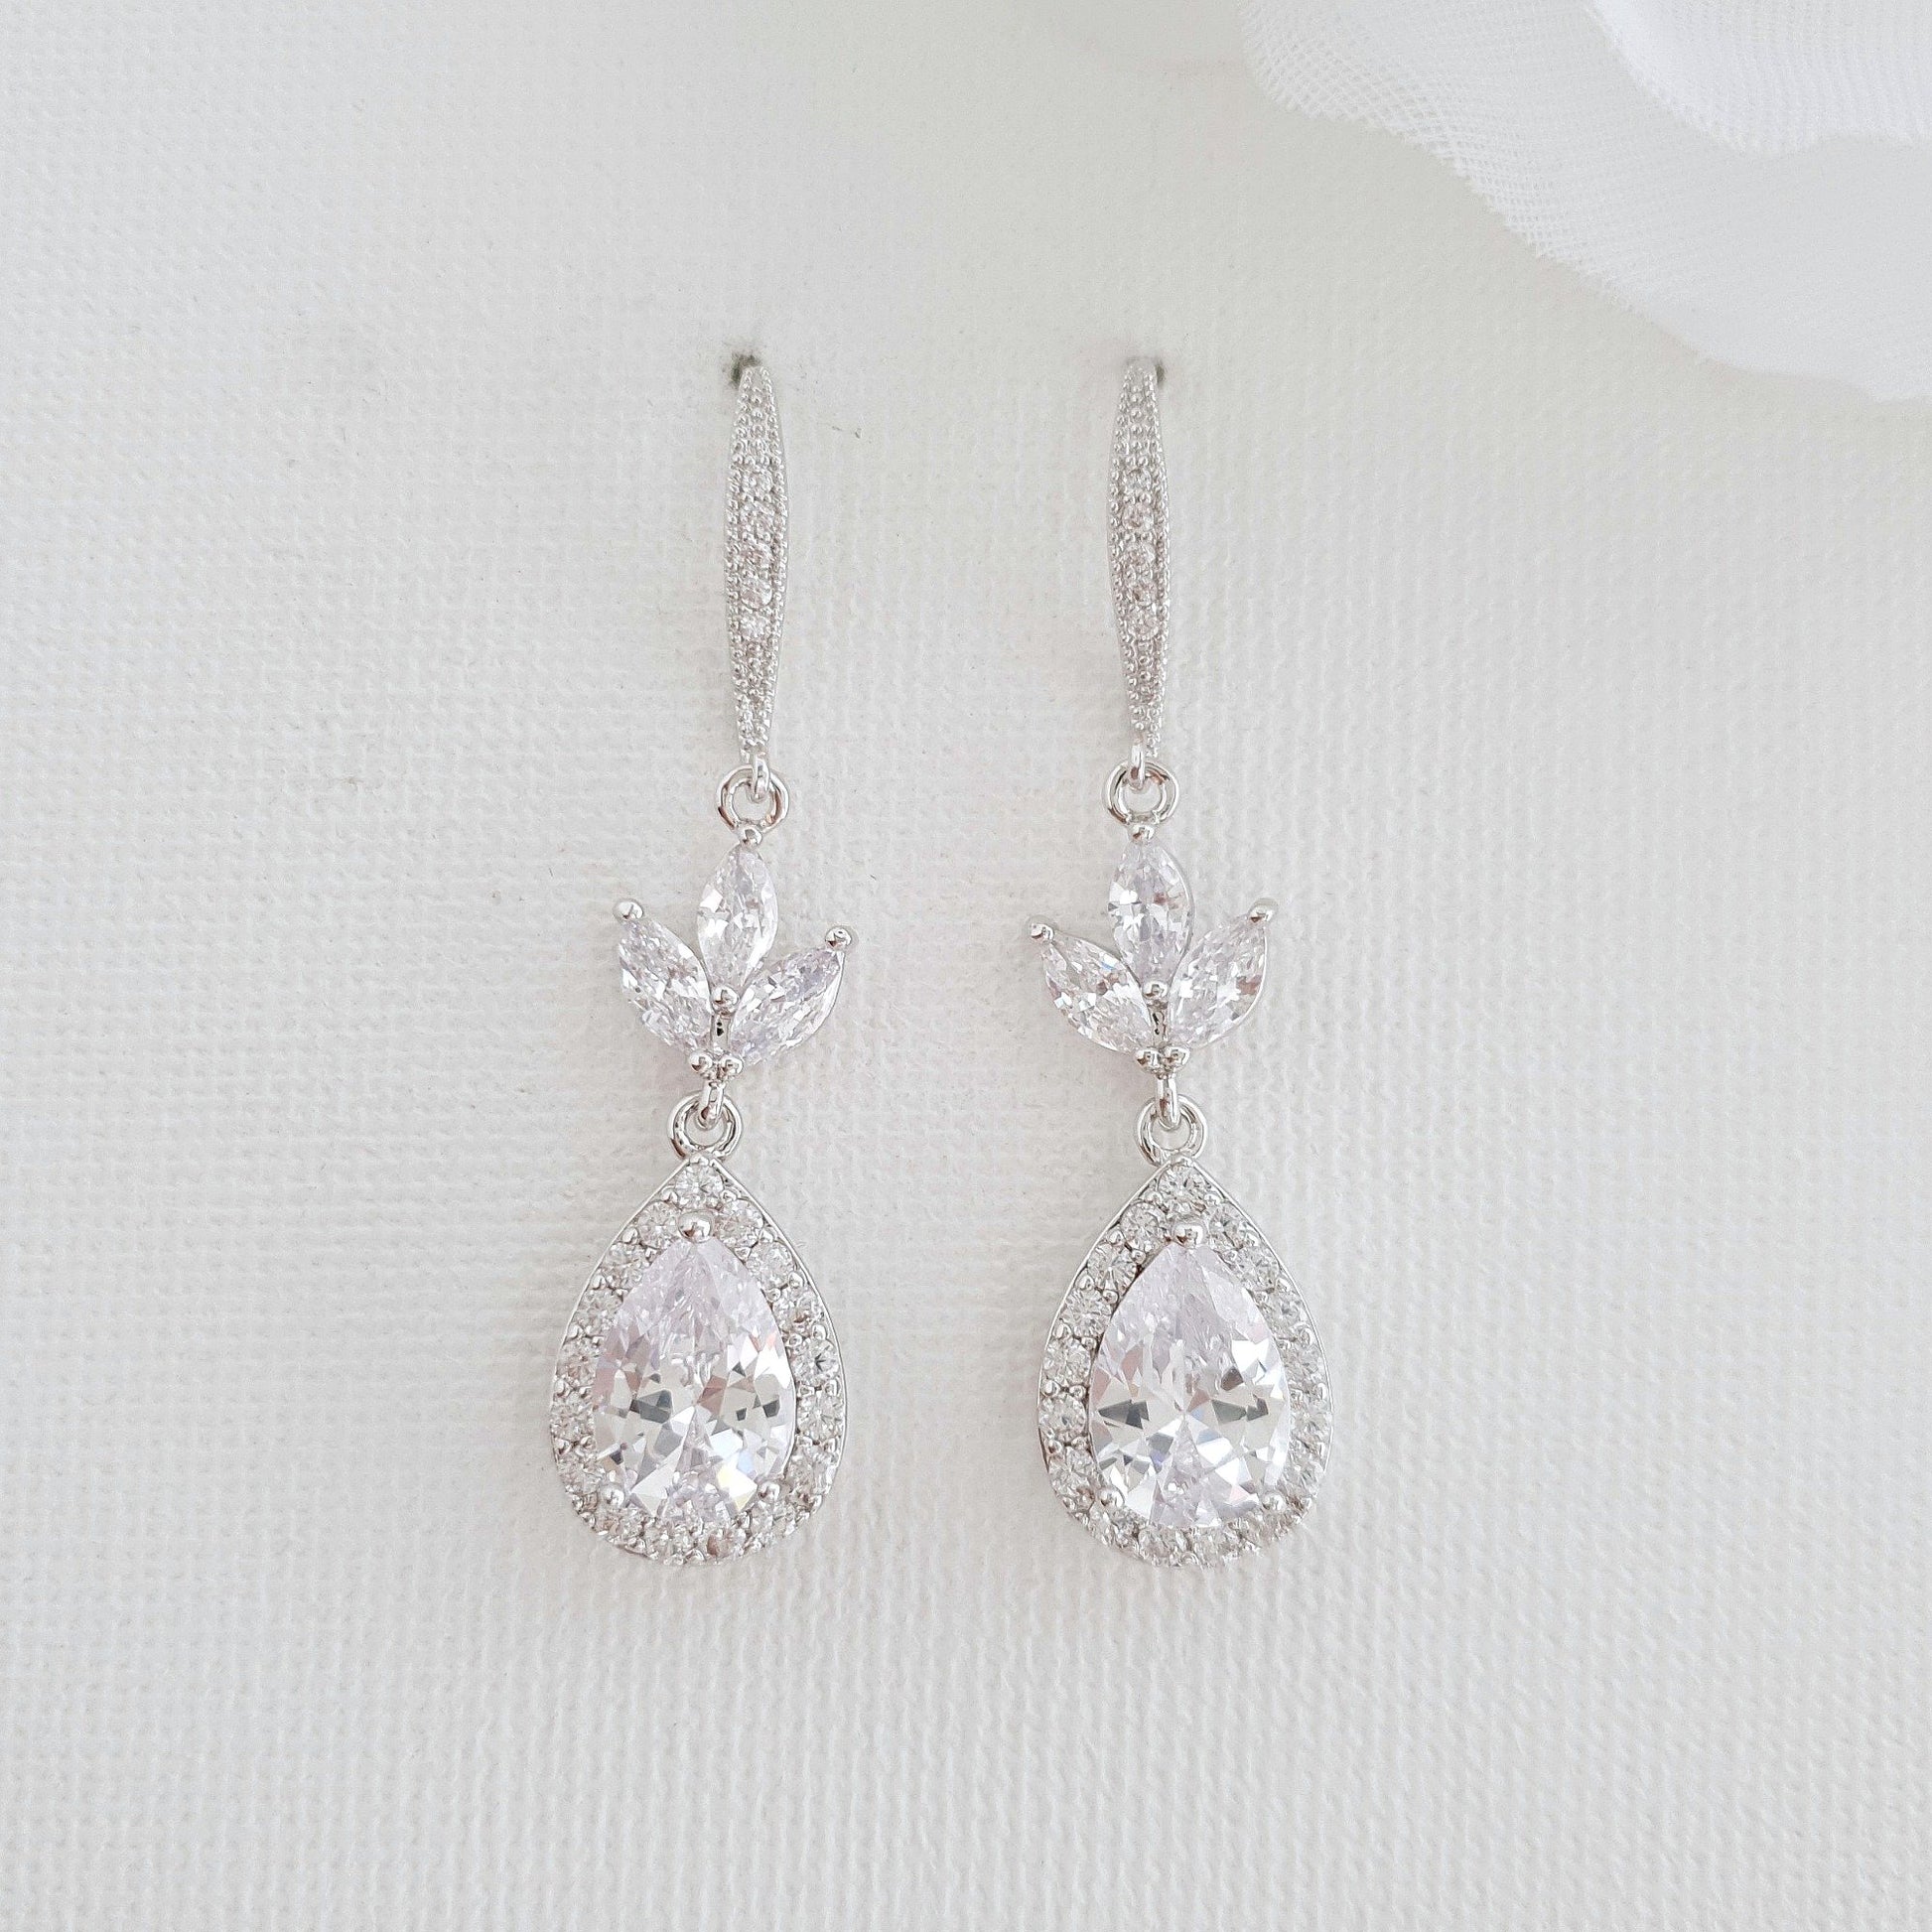 Silver Hook Earrings for Weddings & Brides With CZ Crystal Dangle